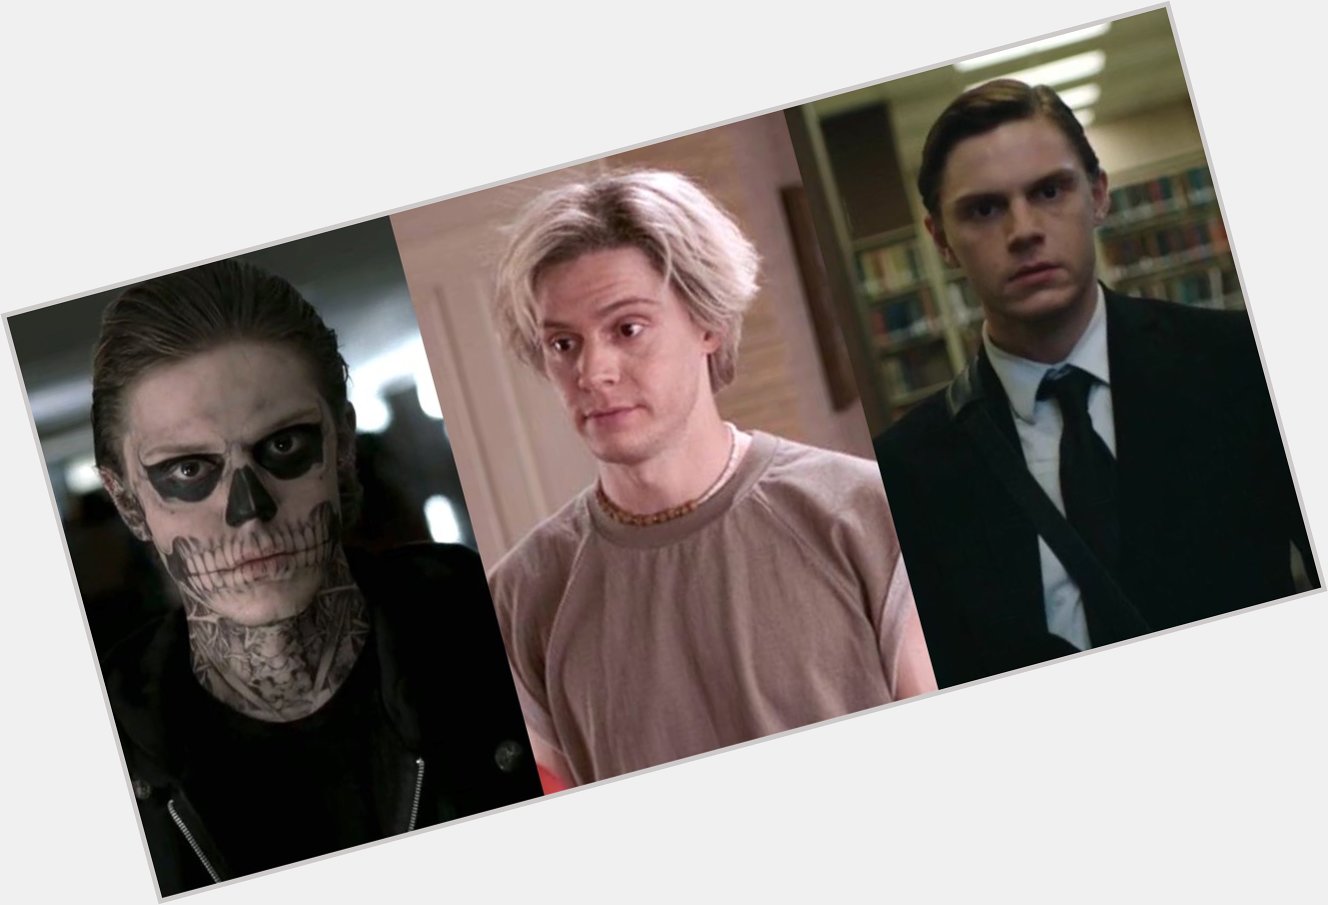 Happy birthday to this insanely talented actor whom i love the most, evan peters 